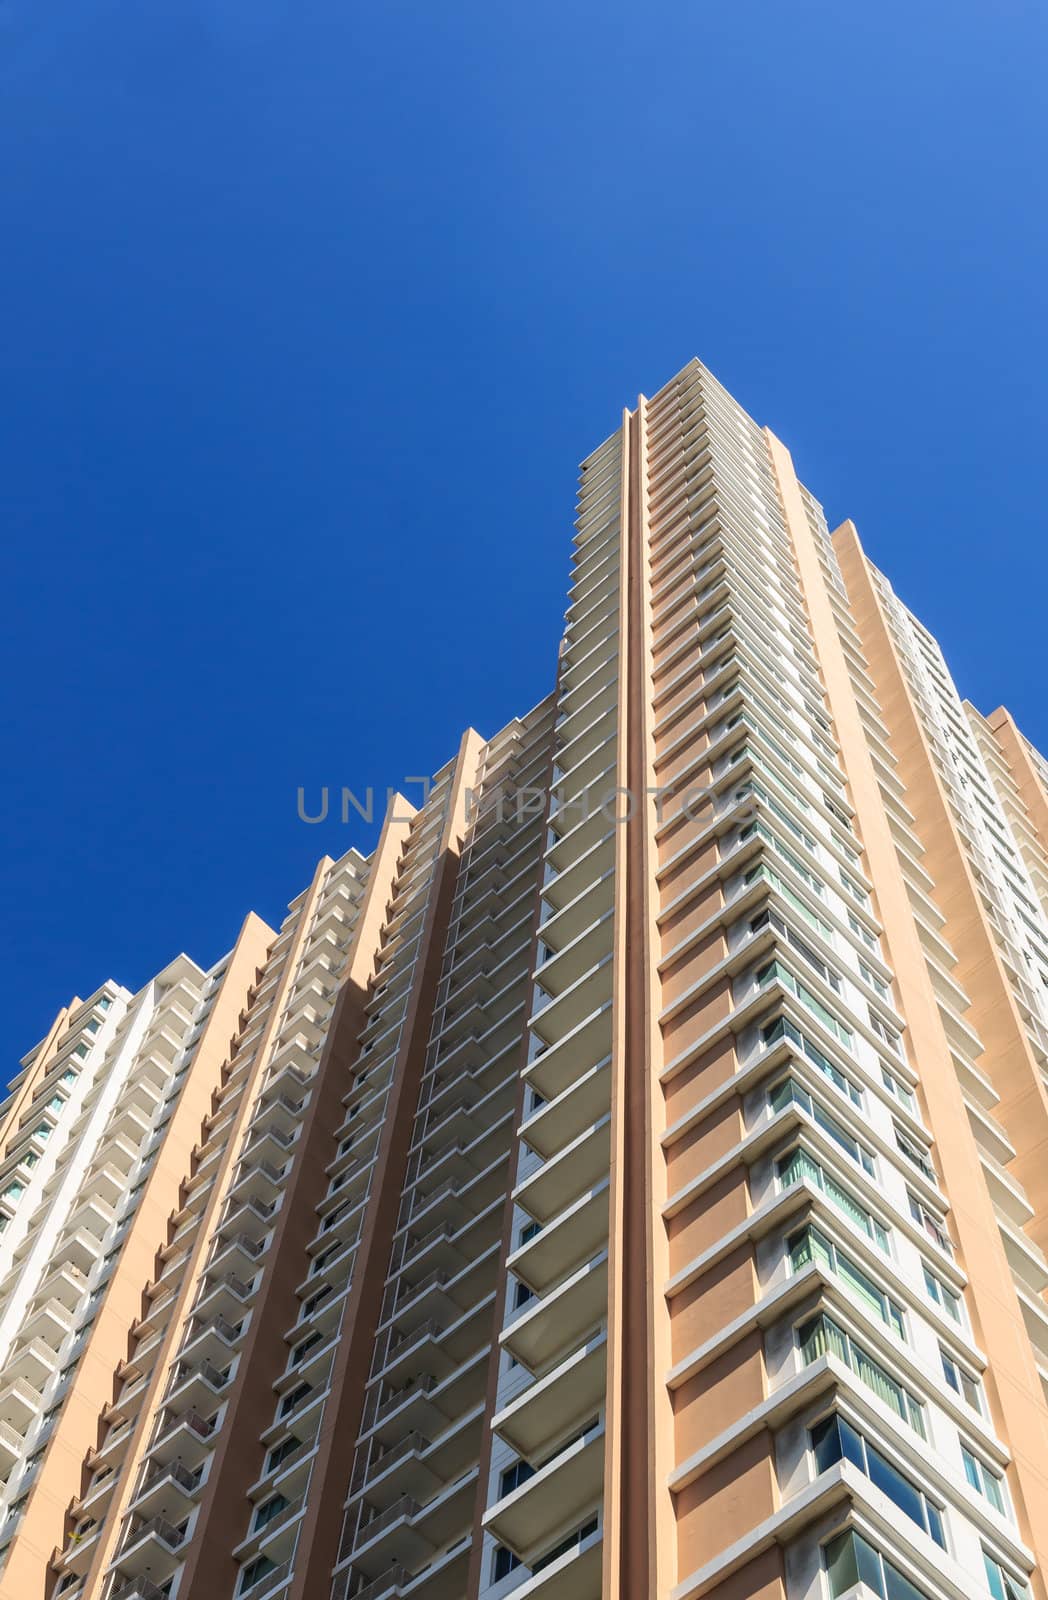 New Highrise Condominium with Blue Sky Background by punpleng